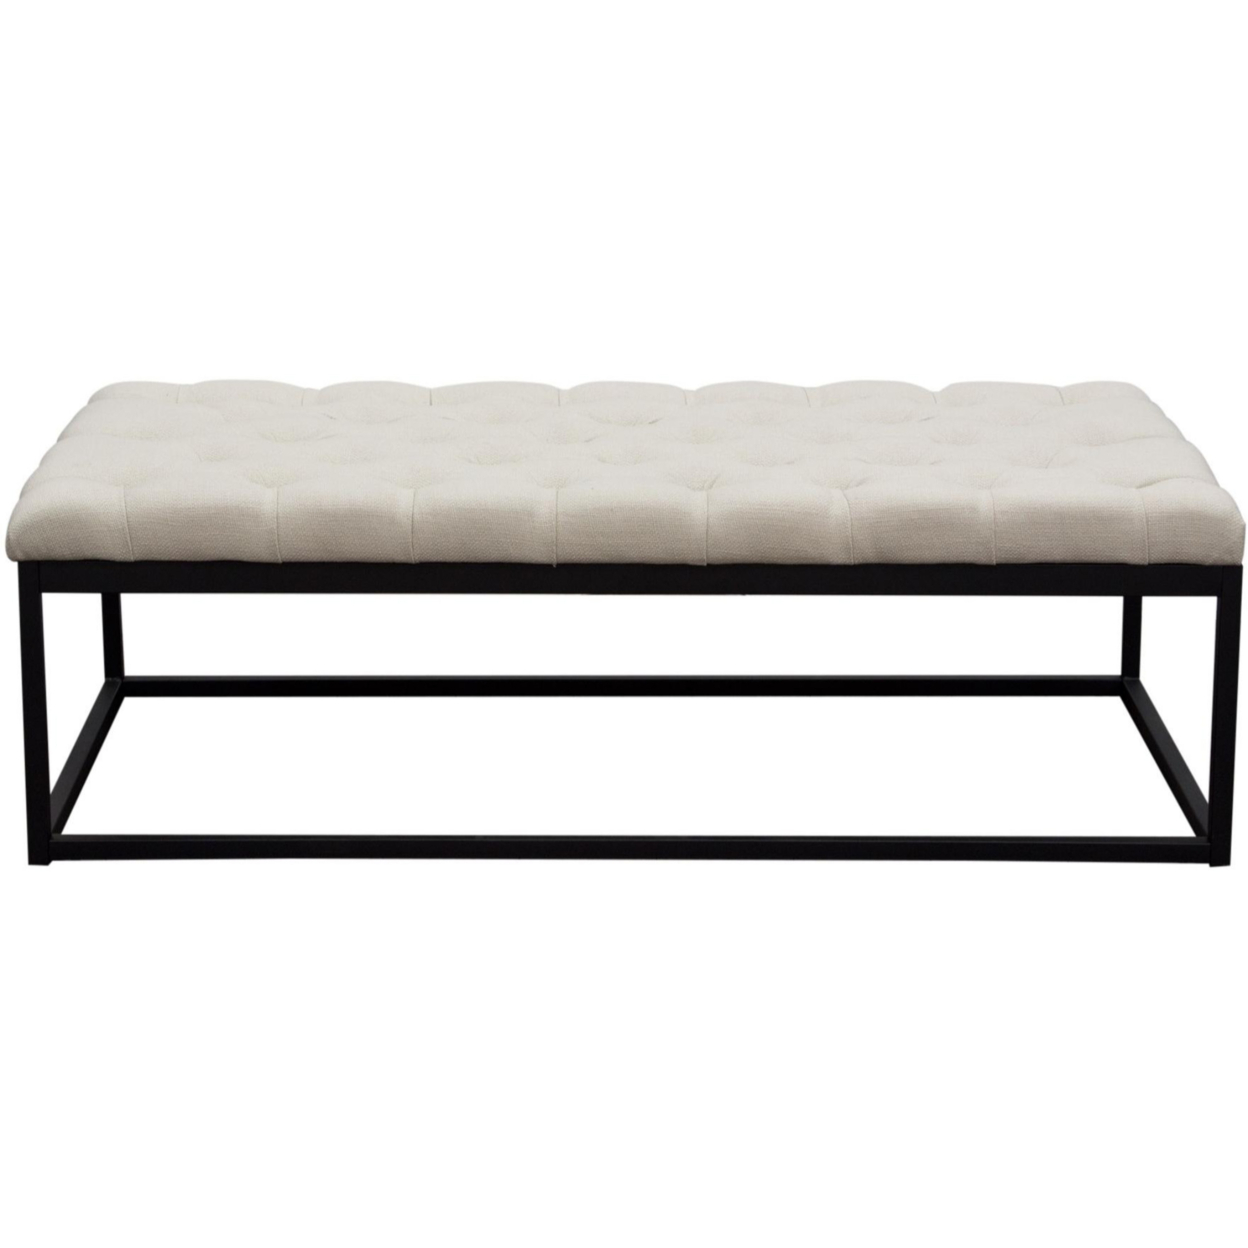 Linen Upholstered Button Tufted Bench With Open Metal Base, Large, Beige And Black- Saltoro Sherpi